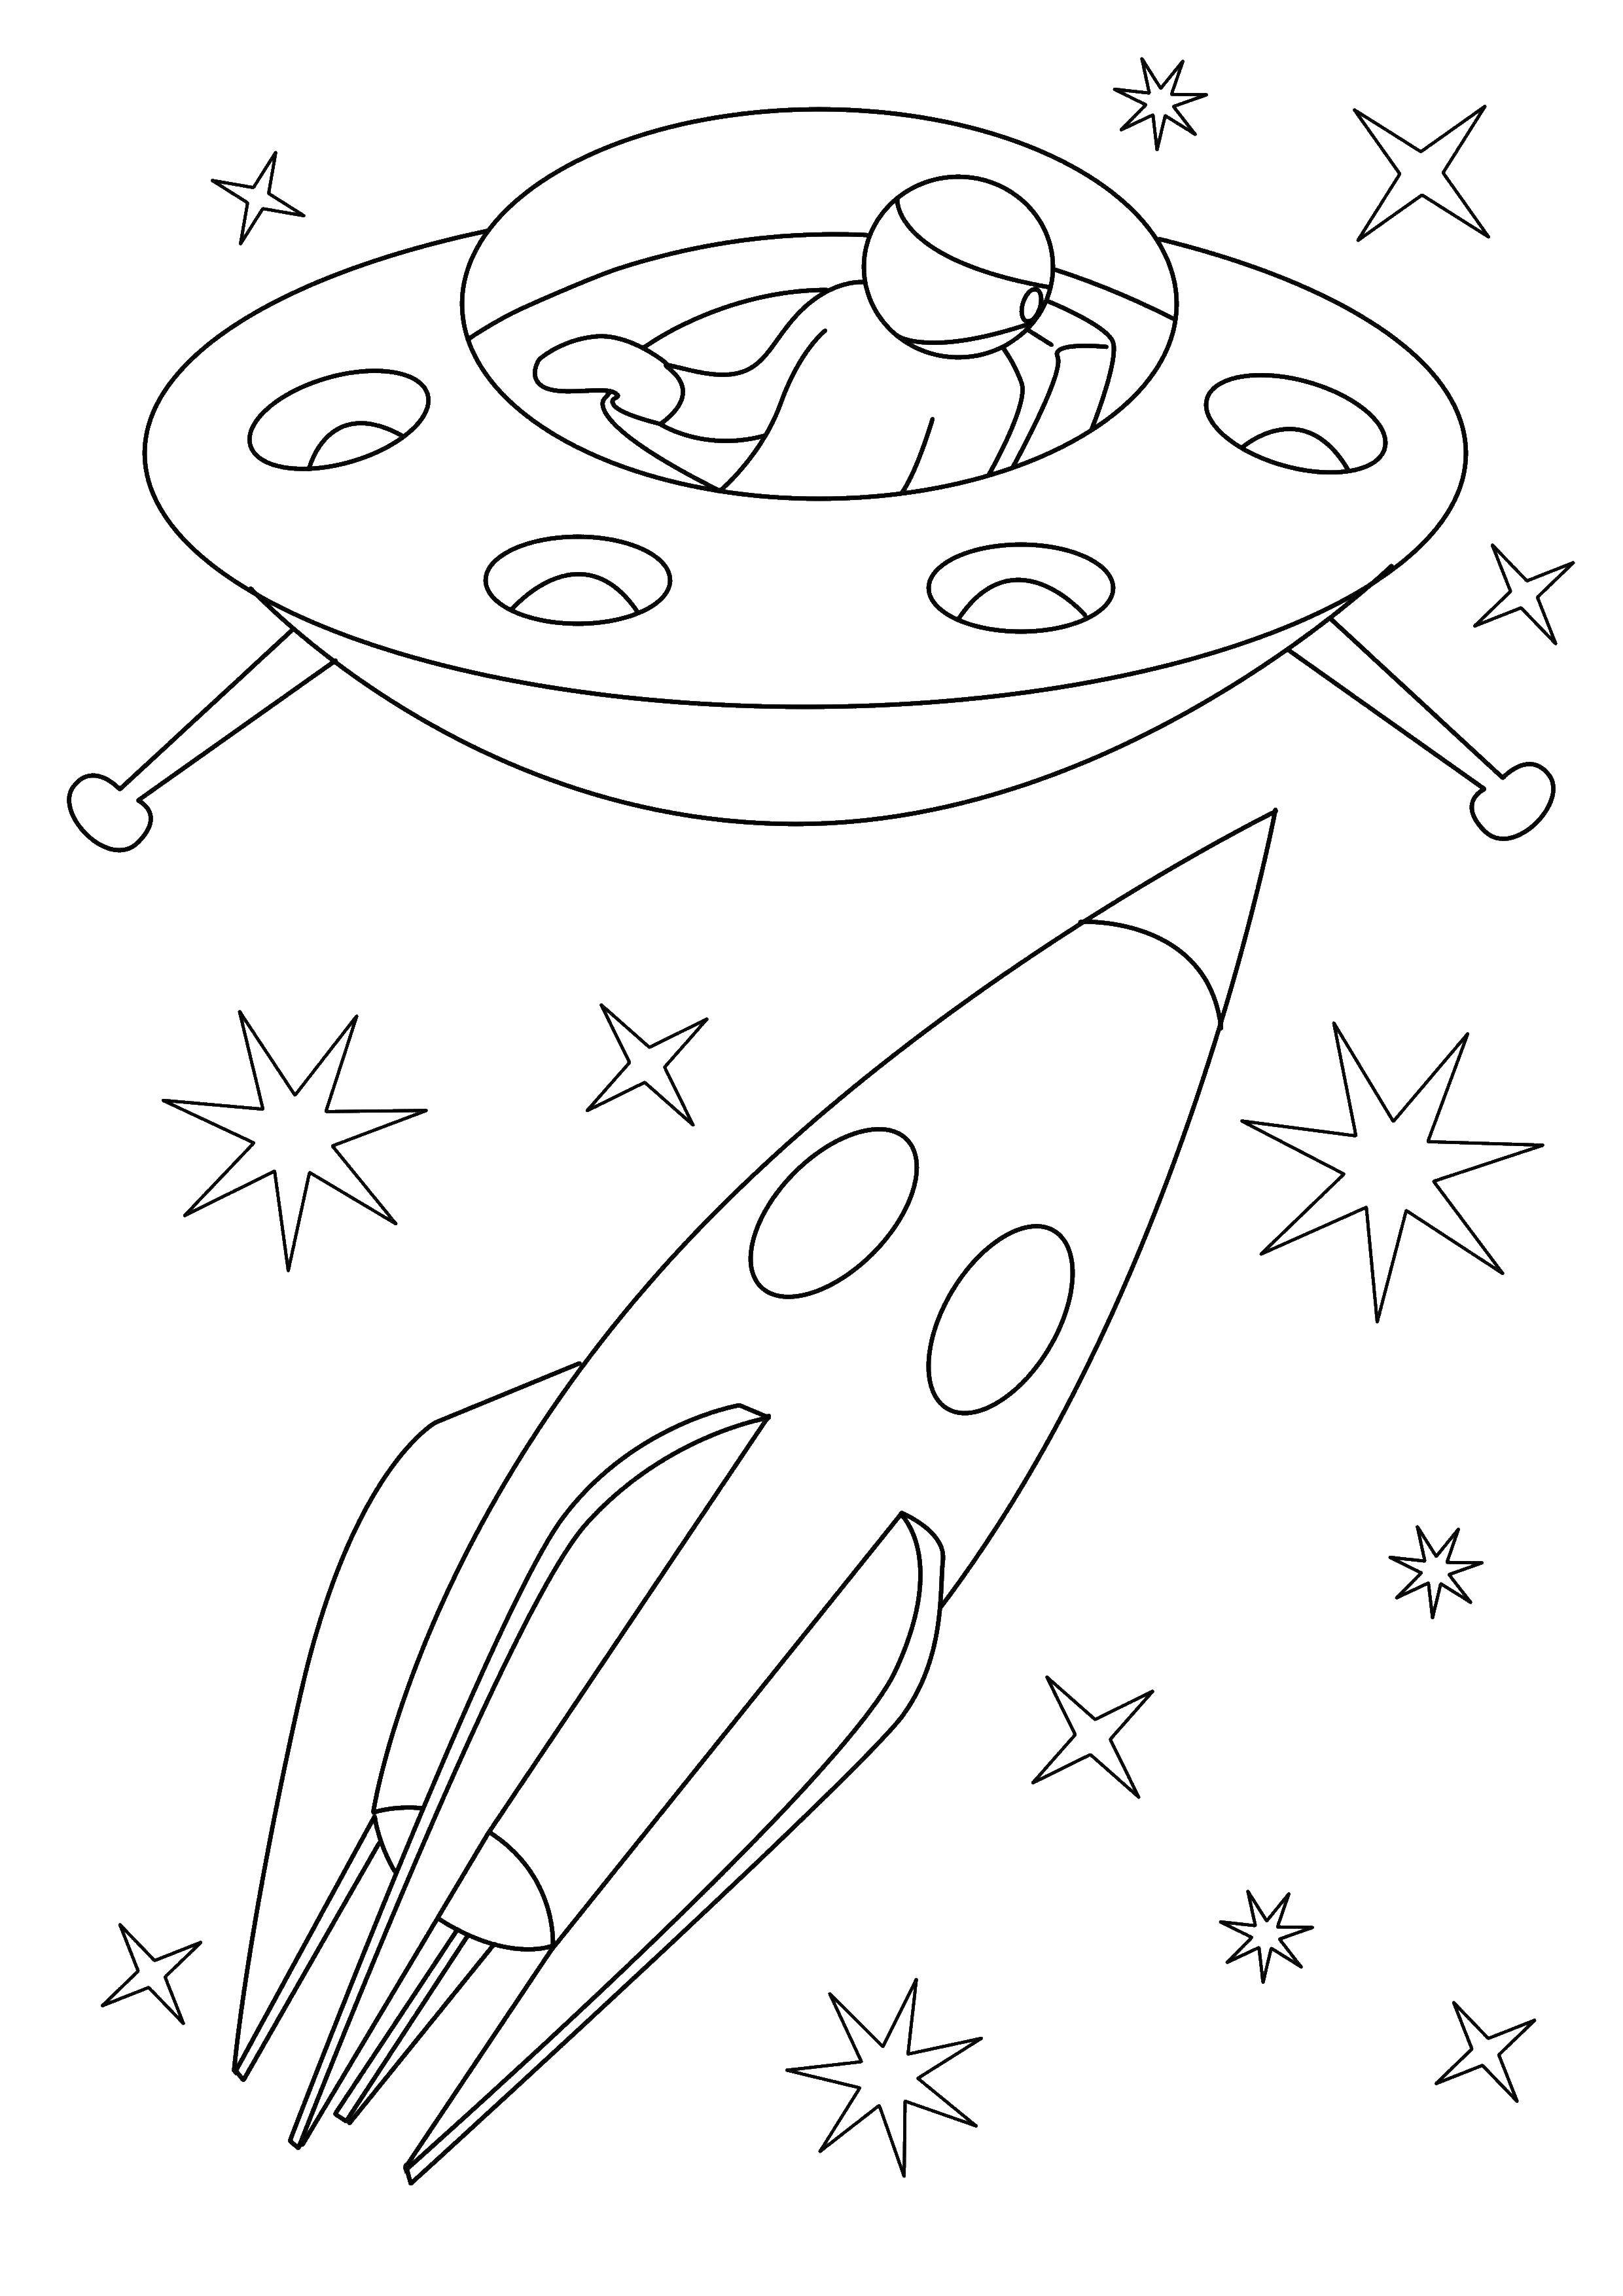 Coloring Flying saucer and rocket. Category rocket. Tags:  space, rocket, stars, UFO.